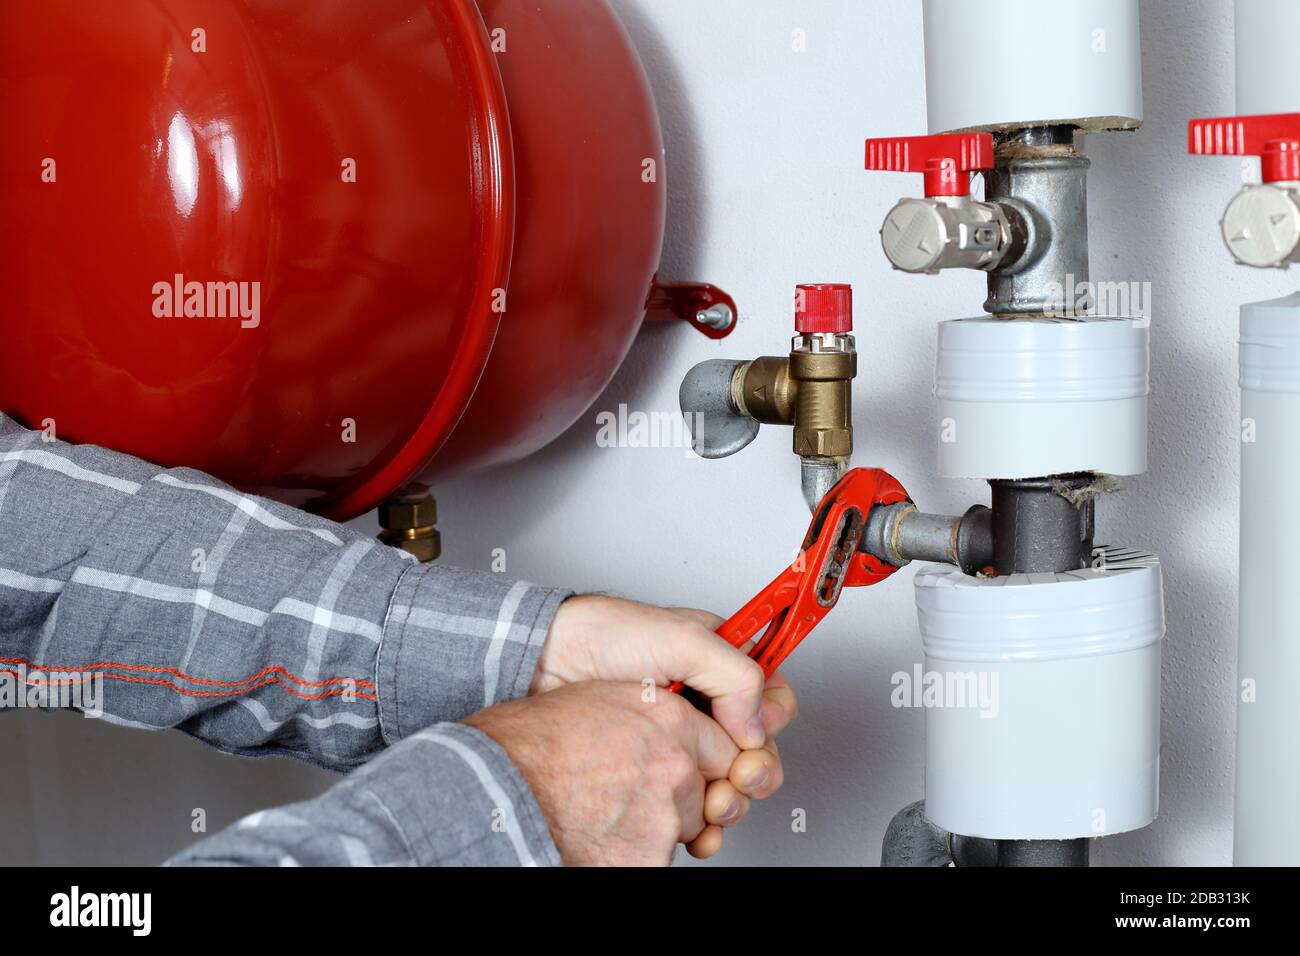 worker is fixing a metal pipe in a heating room Stock Photo